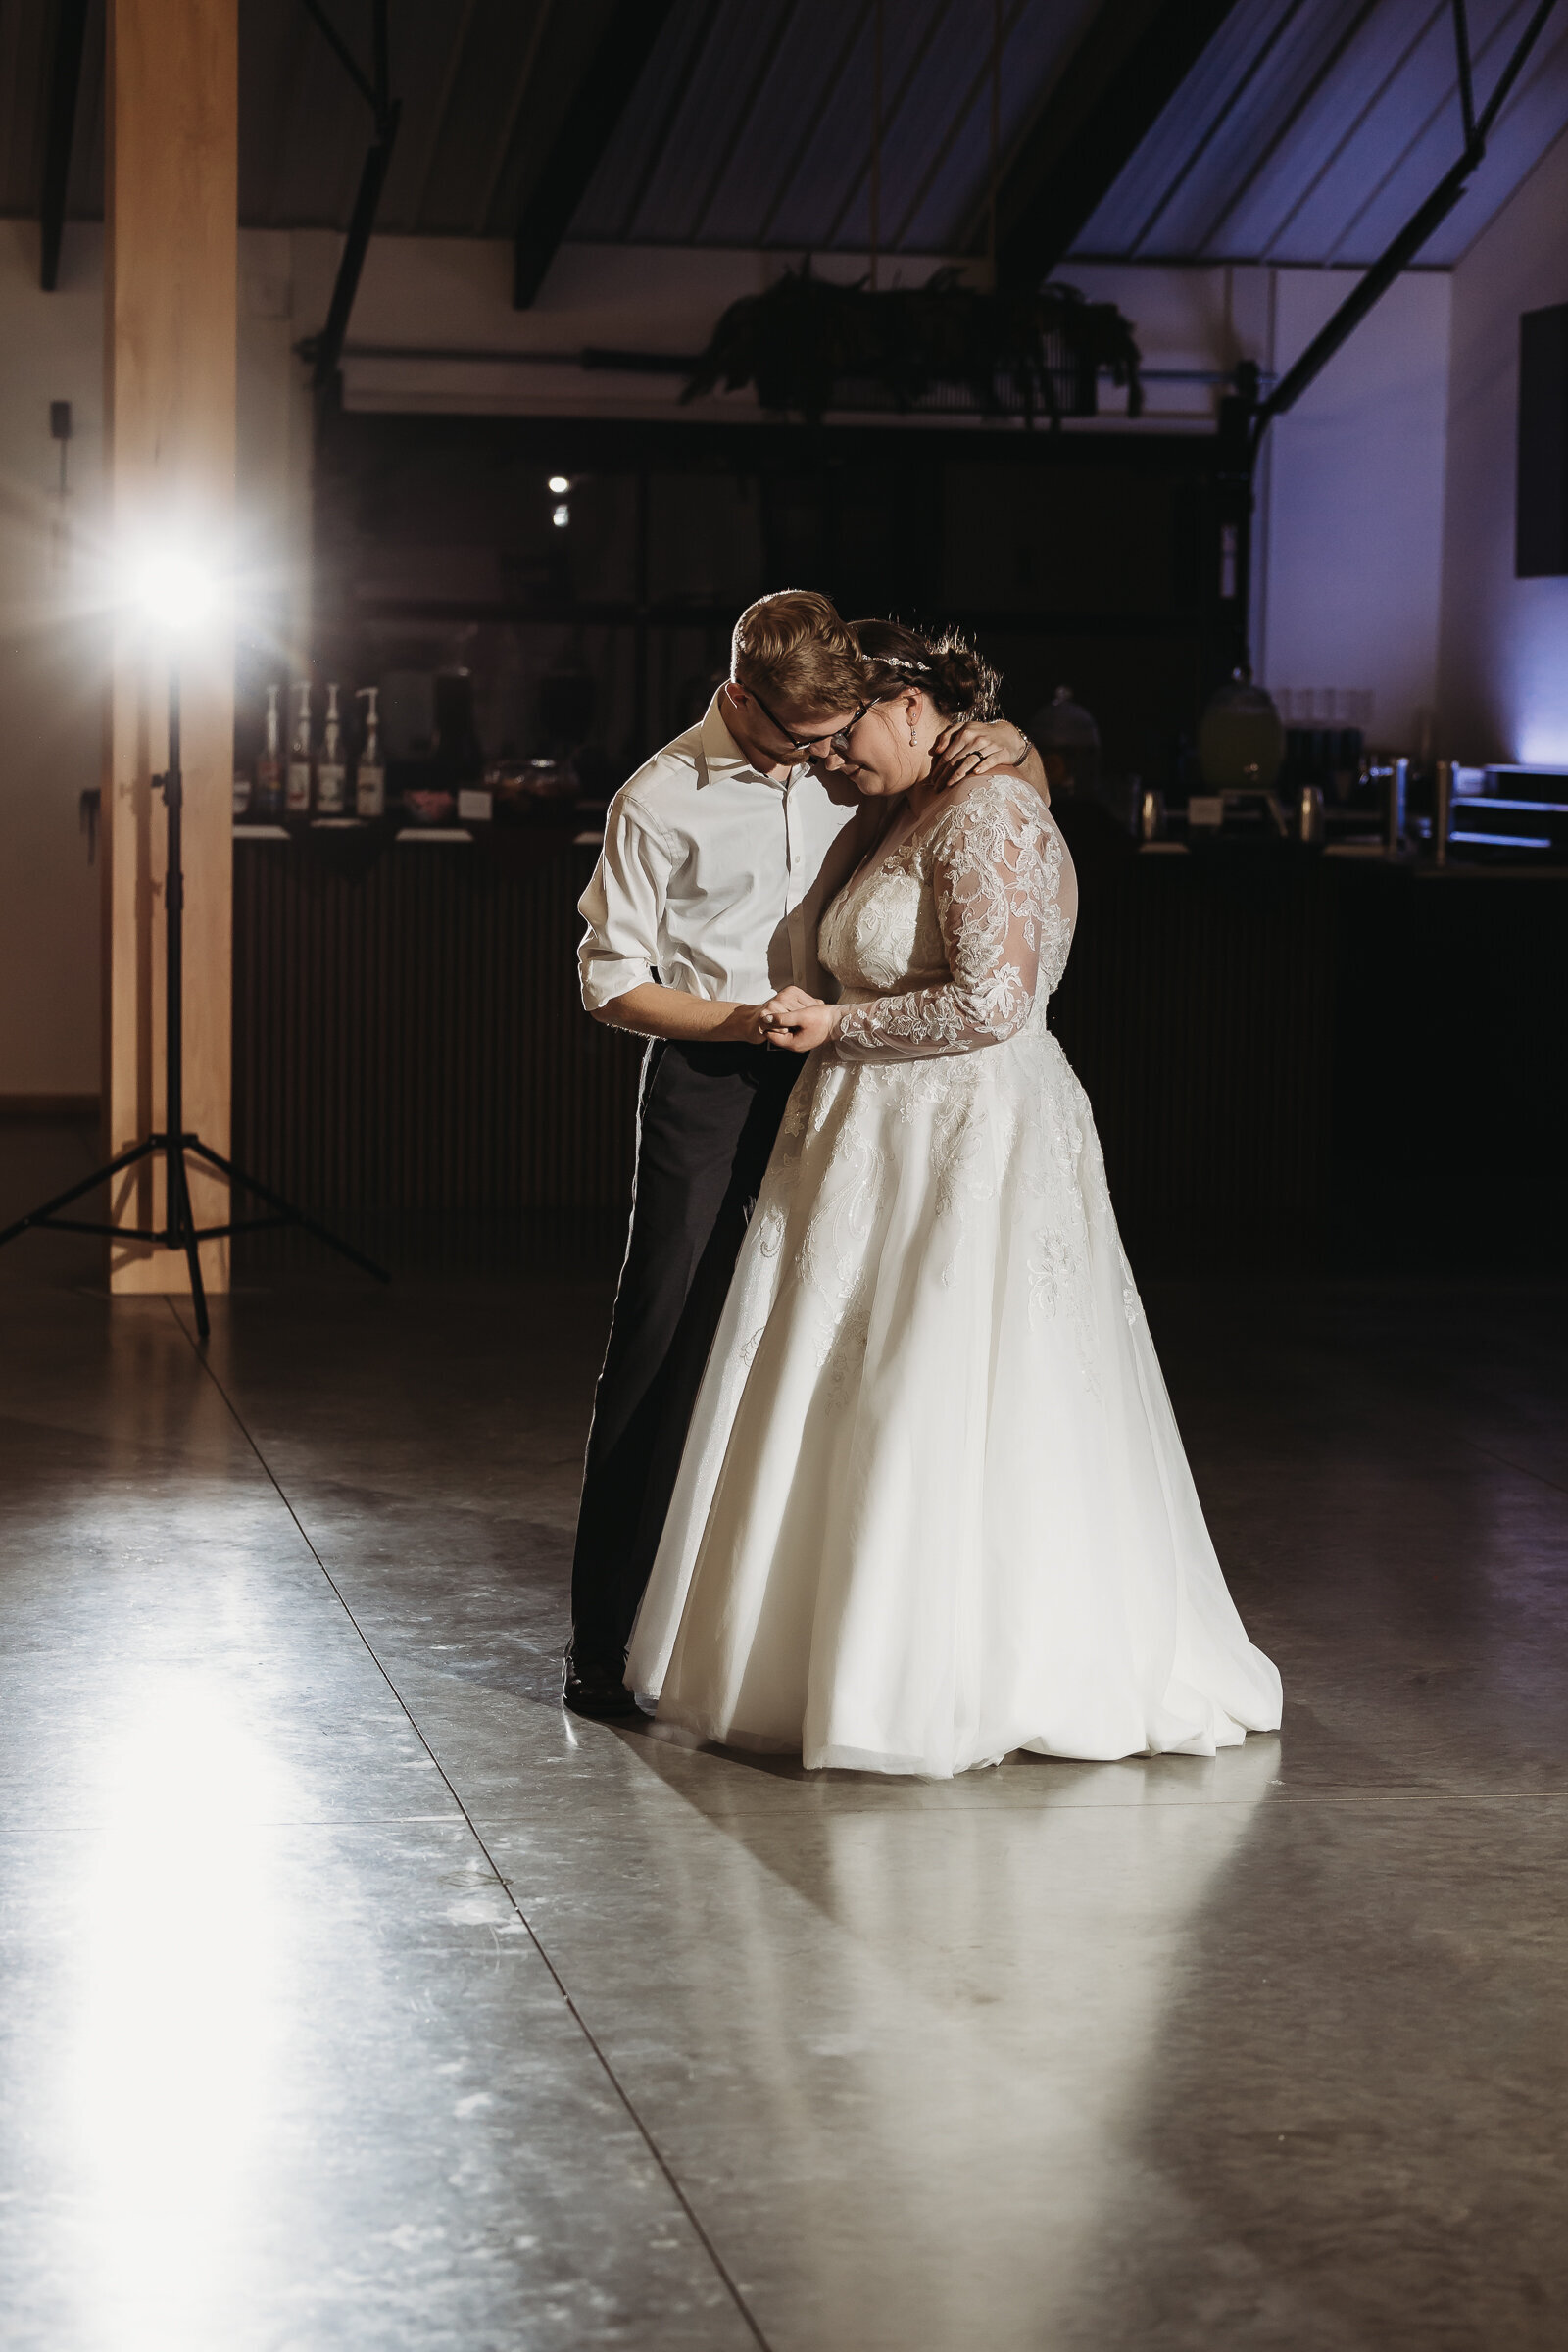 Couple sharing a first dance on their wedding day